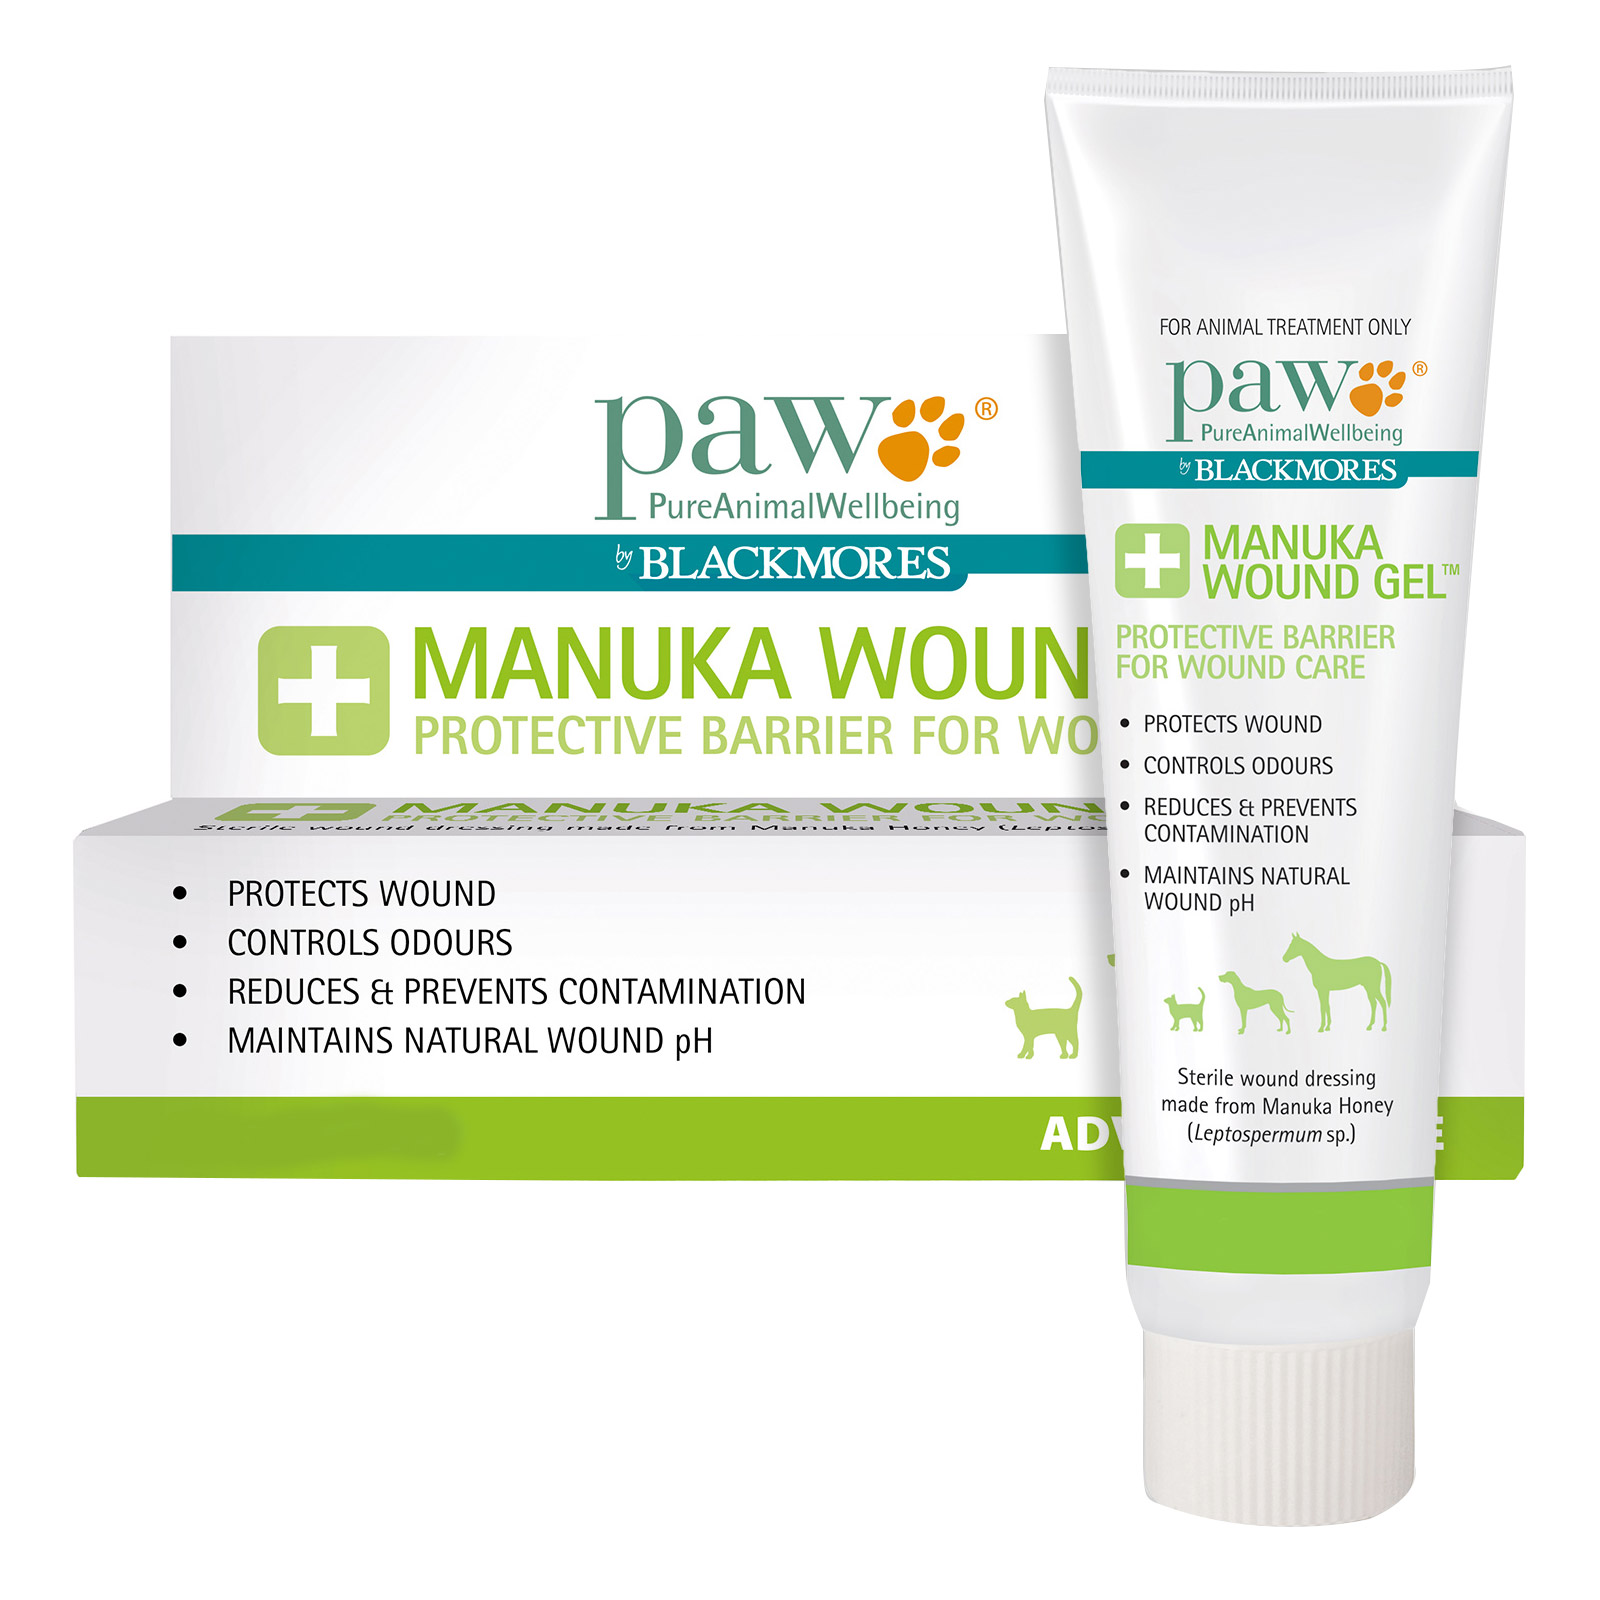 PAW MANUKA WOUND GEL for Dogs